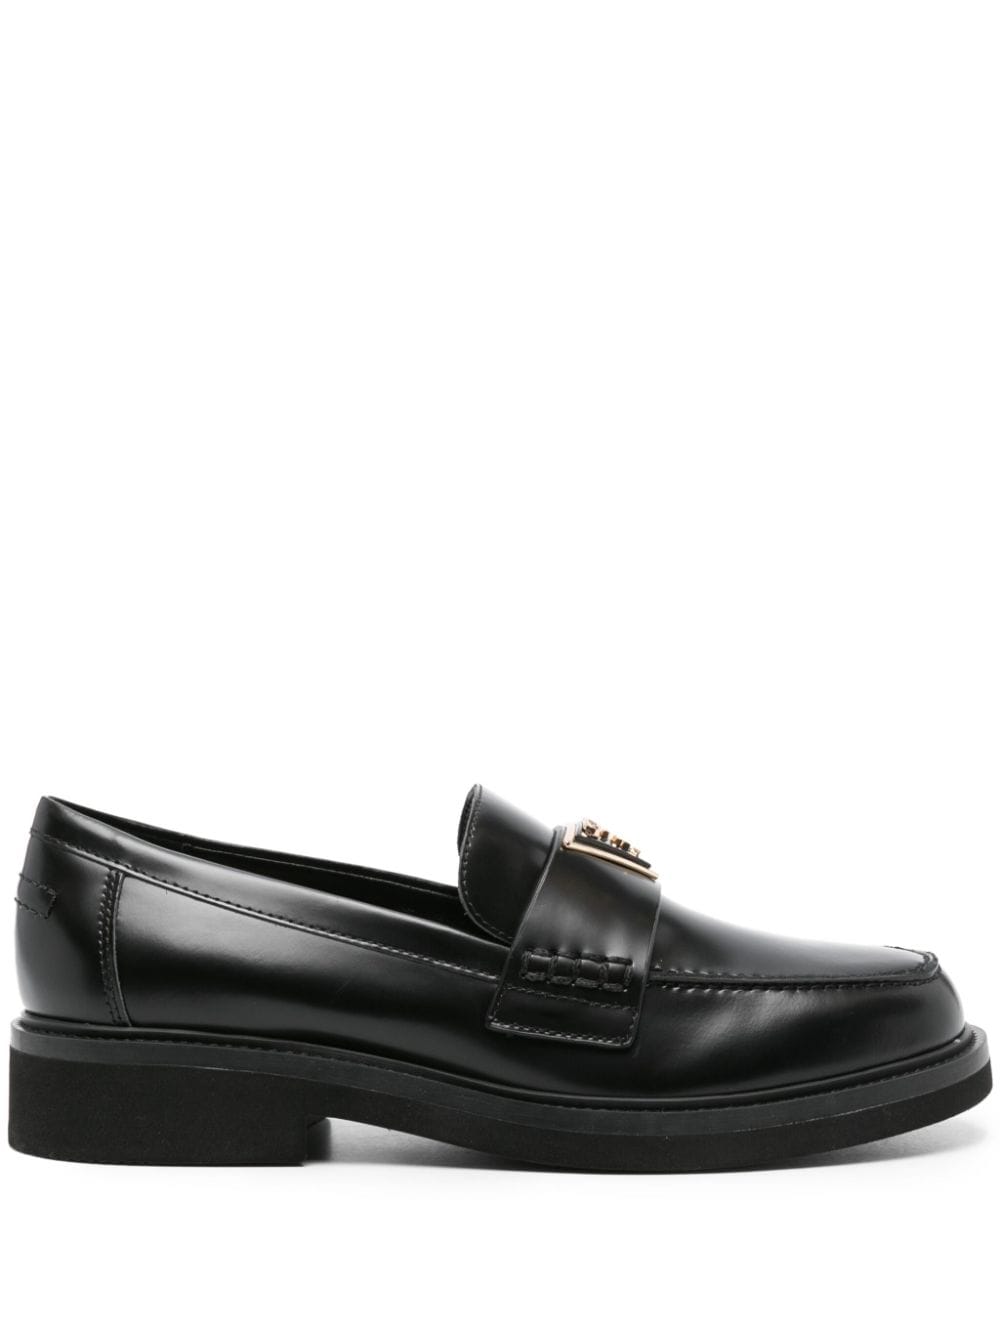 GUESS USA Shatha leather loafers - Black von GUESS USA